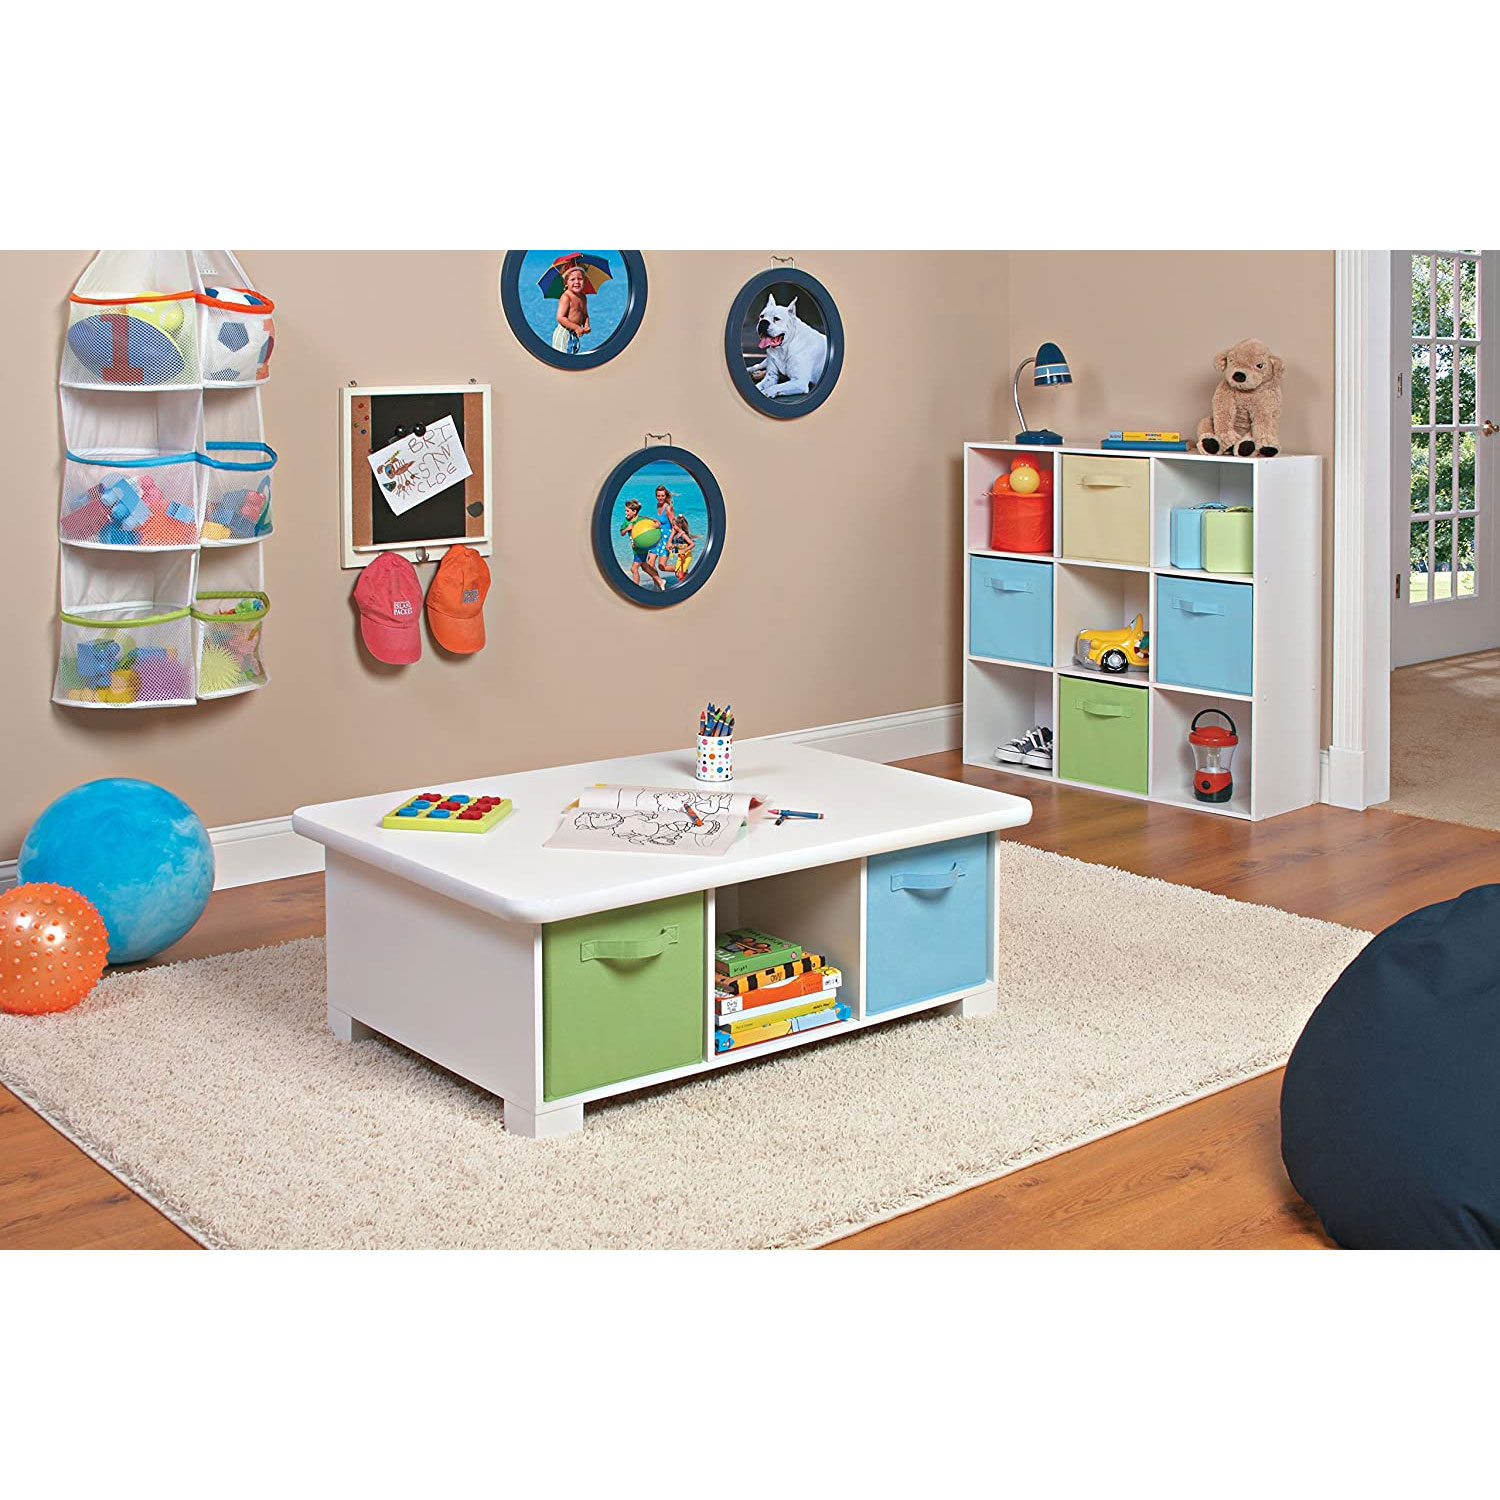 ClosetMaid Toddler Kids Desk Activity Table w/ Storage for Books and